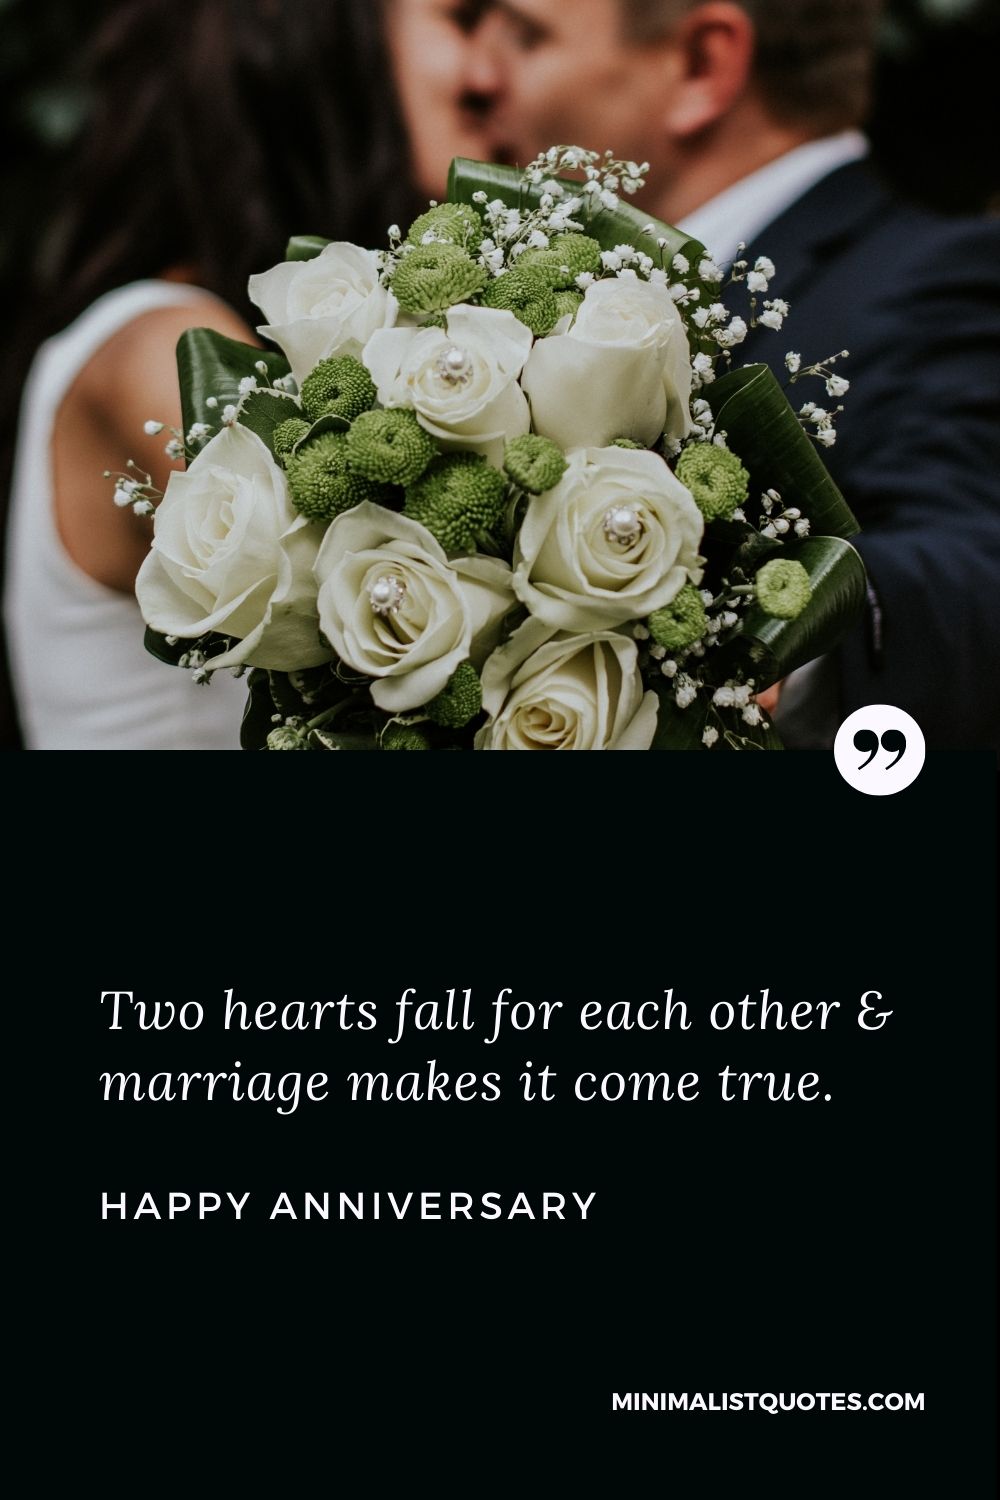 Happy Anniversary Wish - Two hearts fall for each other & marriage makes it come true.